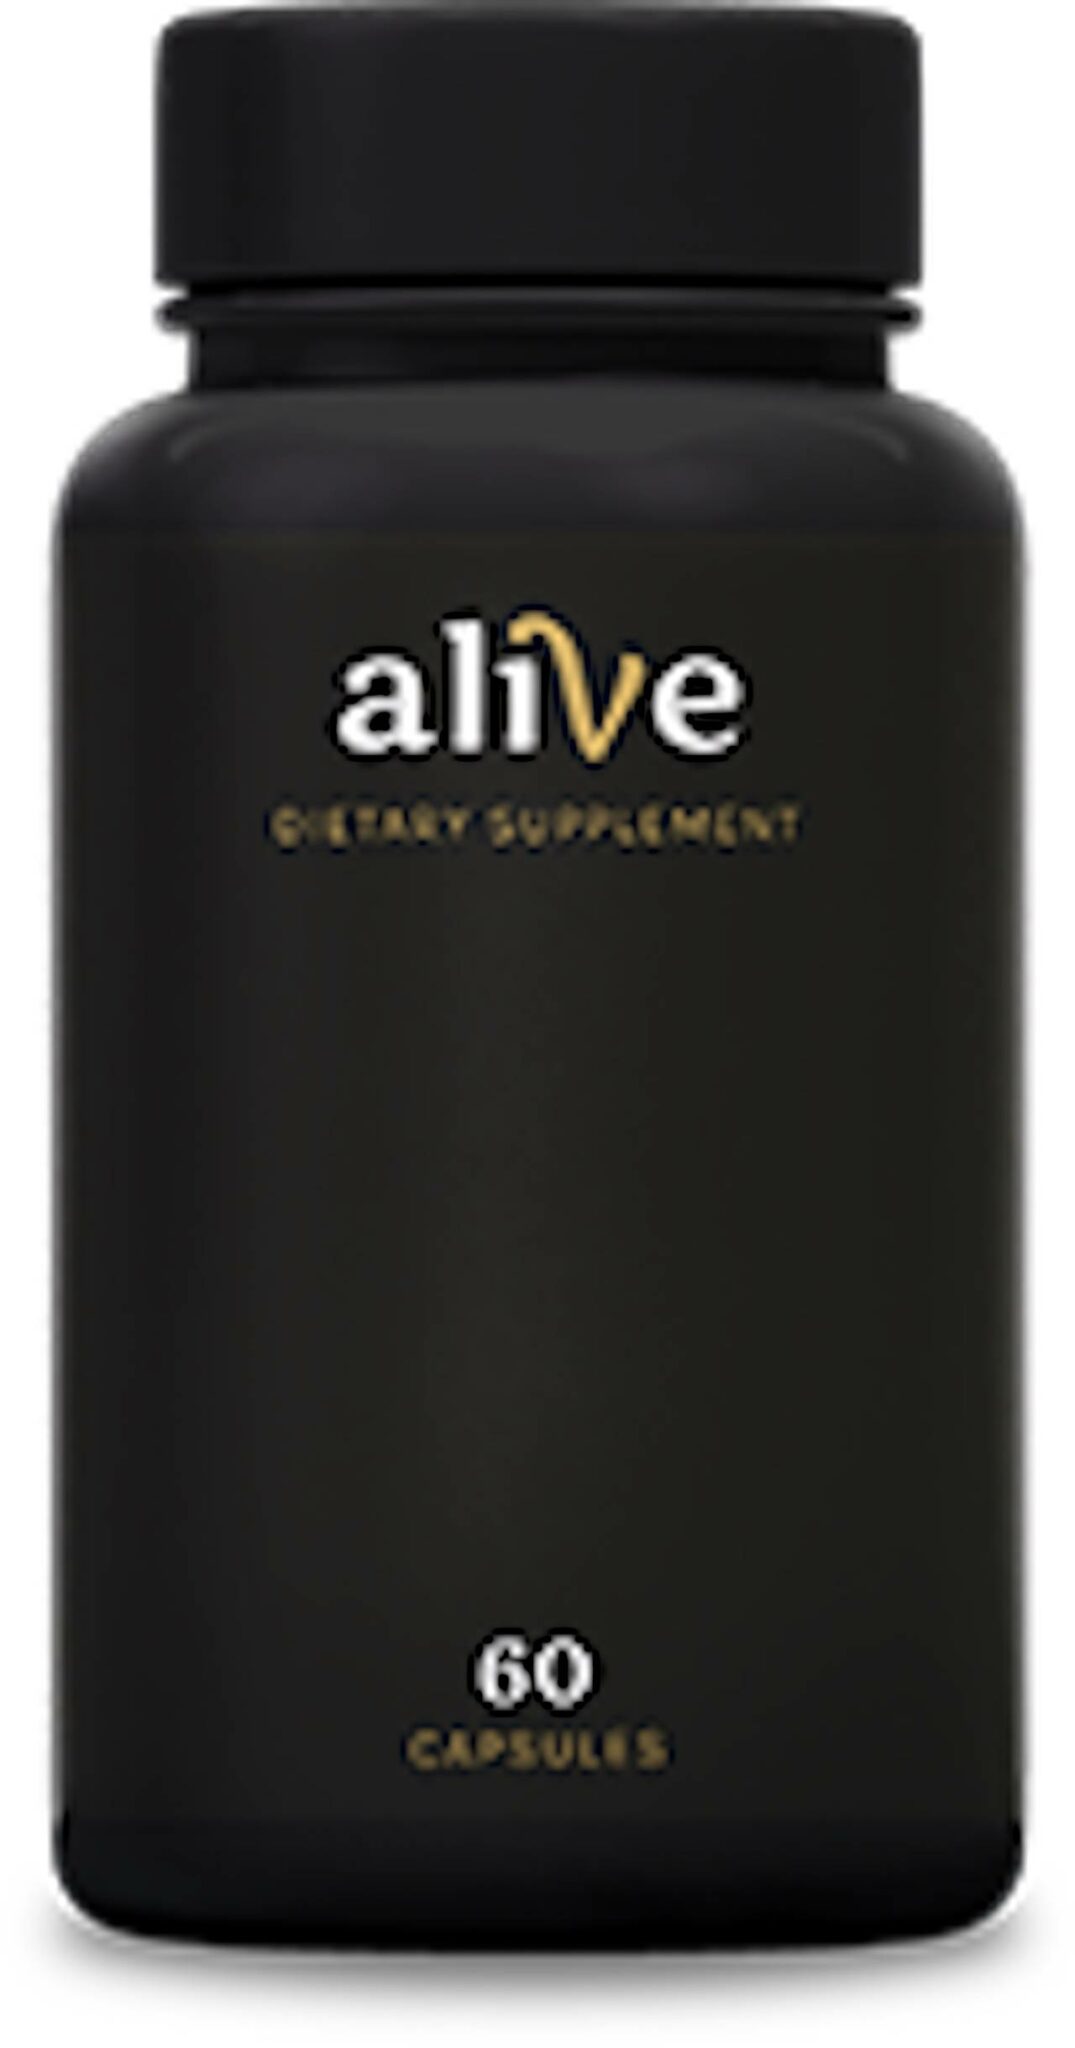 alive supplement review